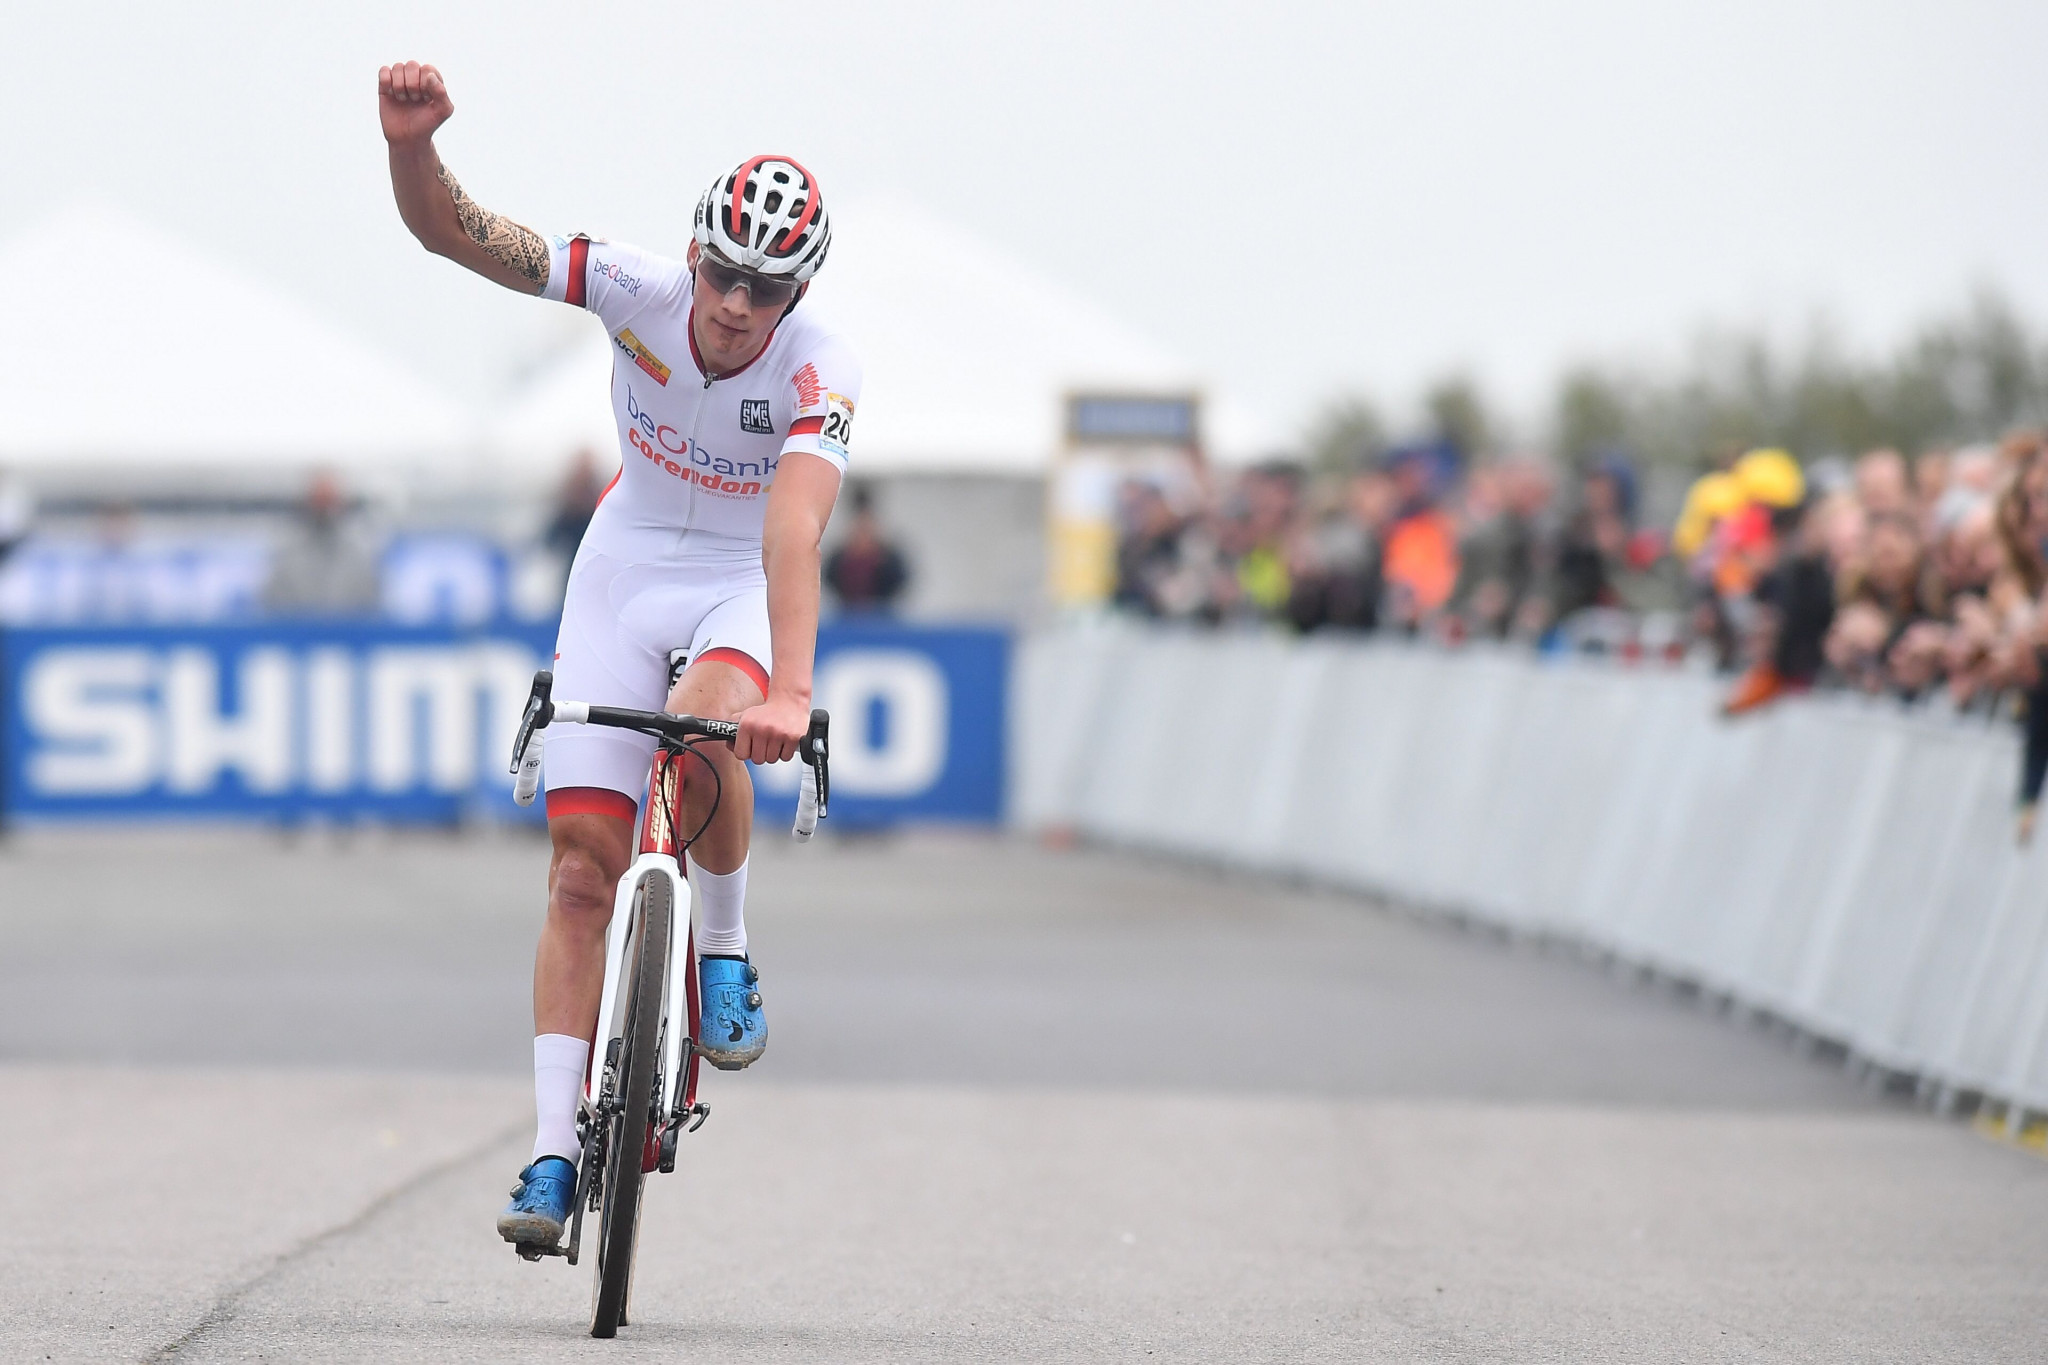 Mathieu van der Poel continued his fine recent form by winning the men's race ©Getty Images